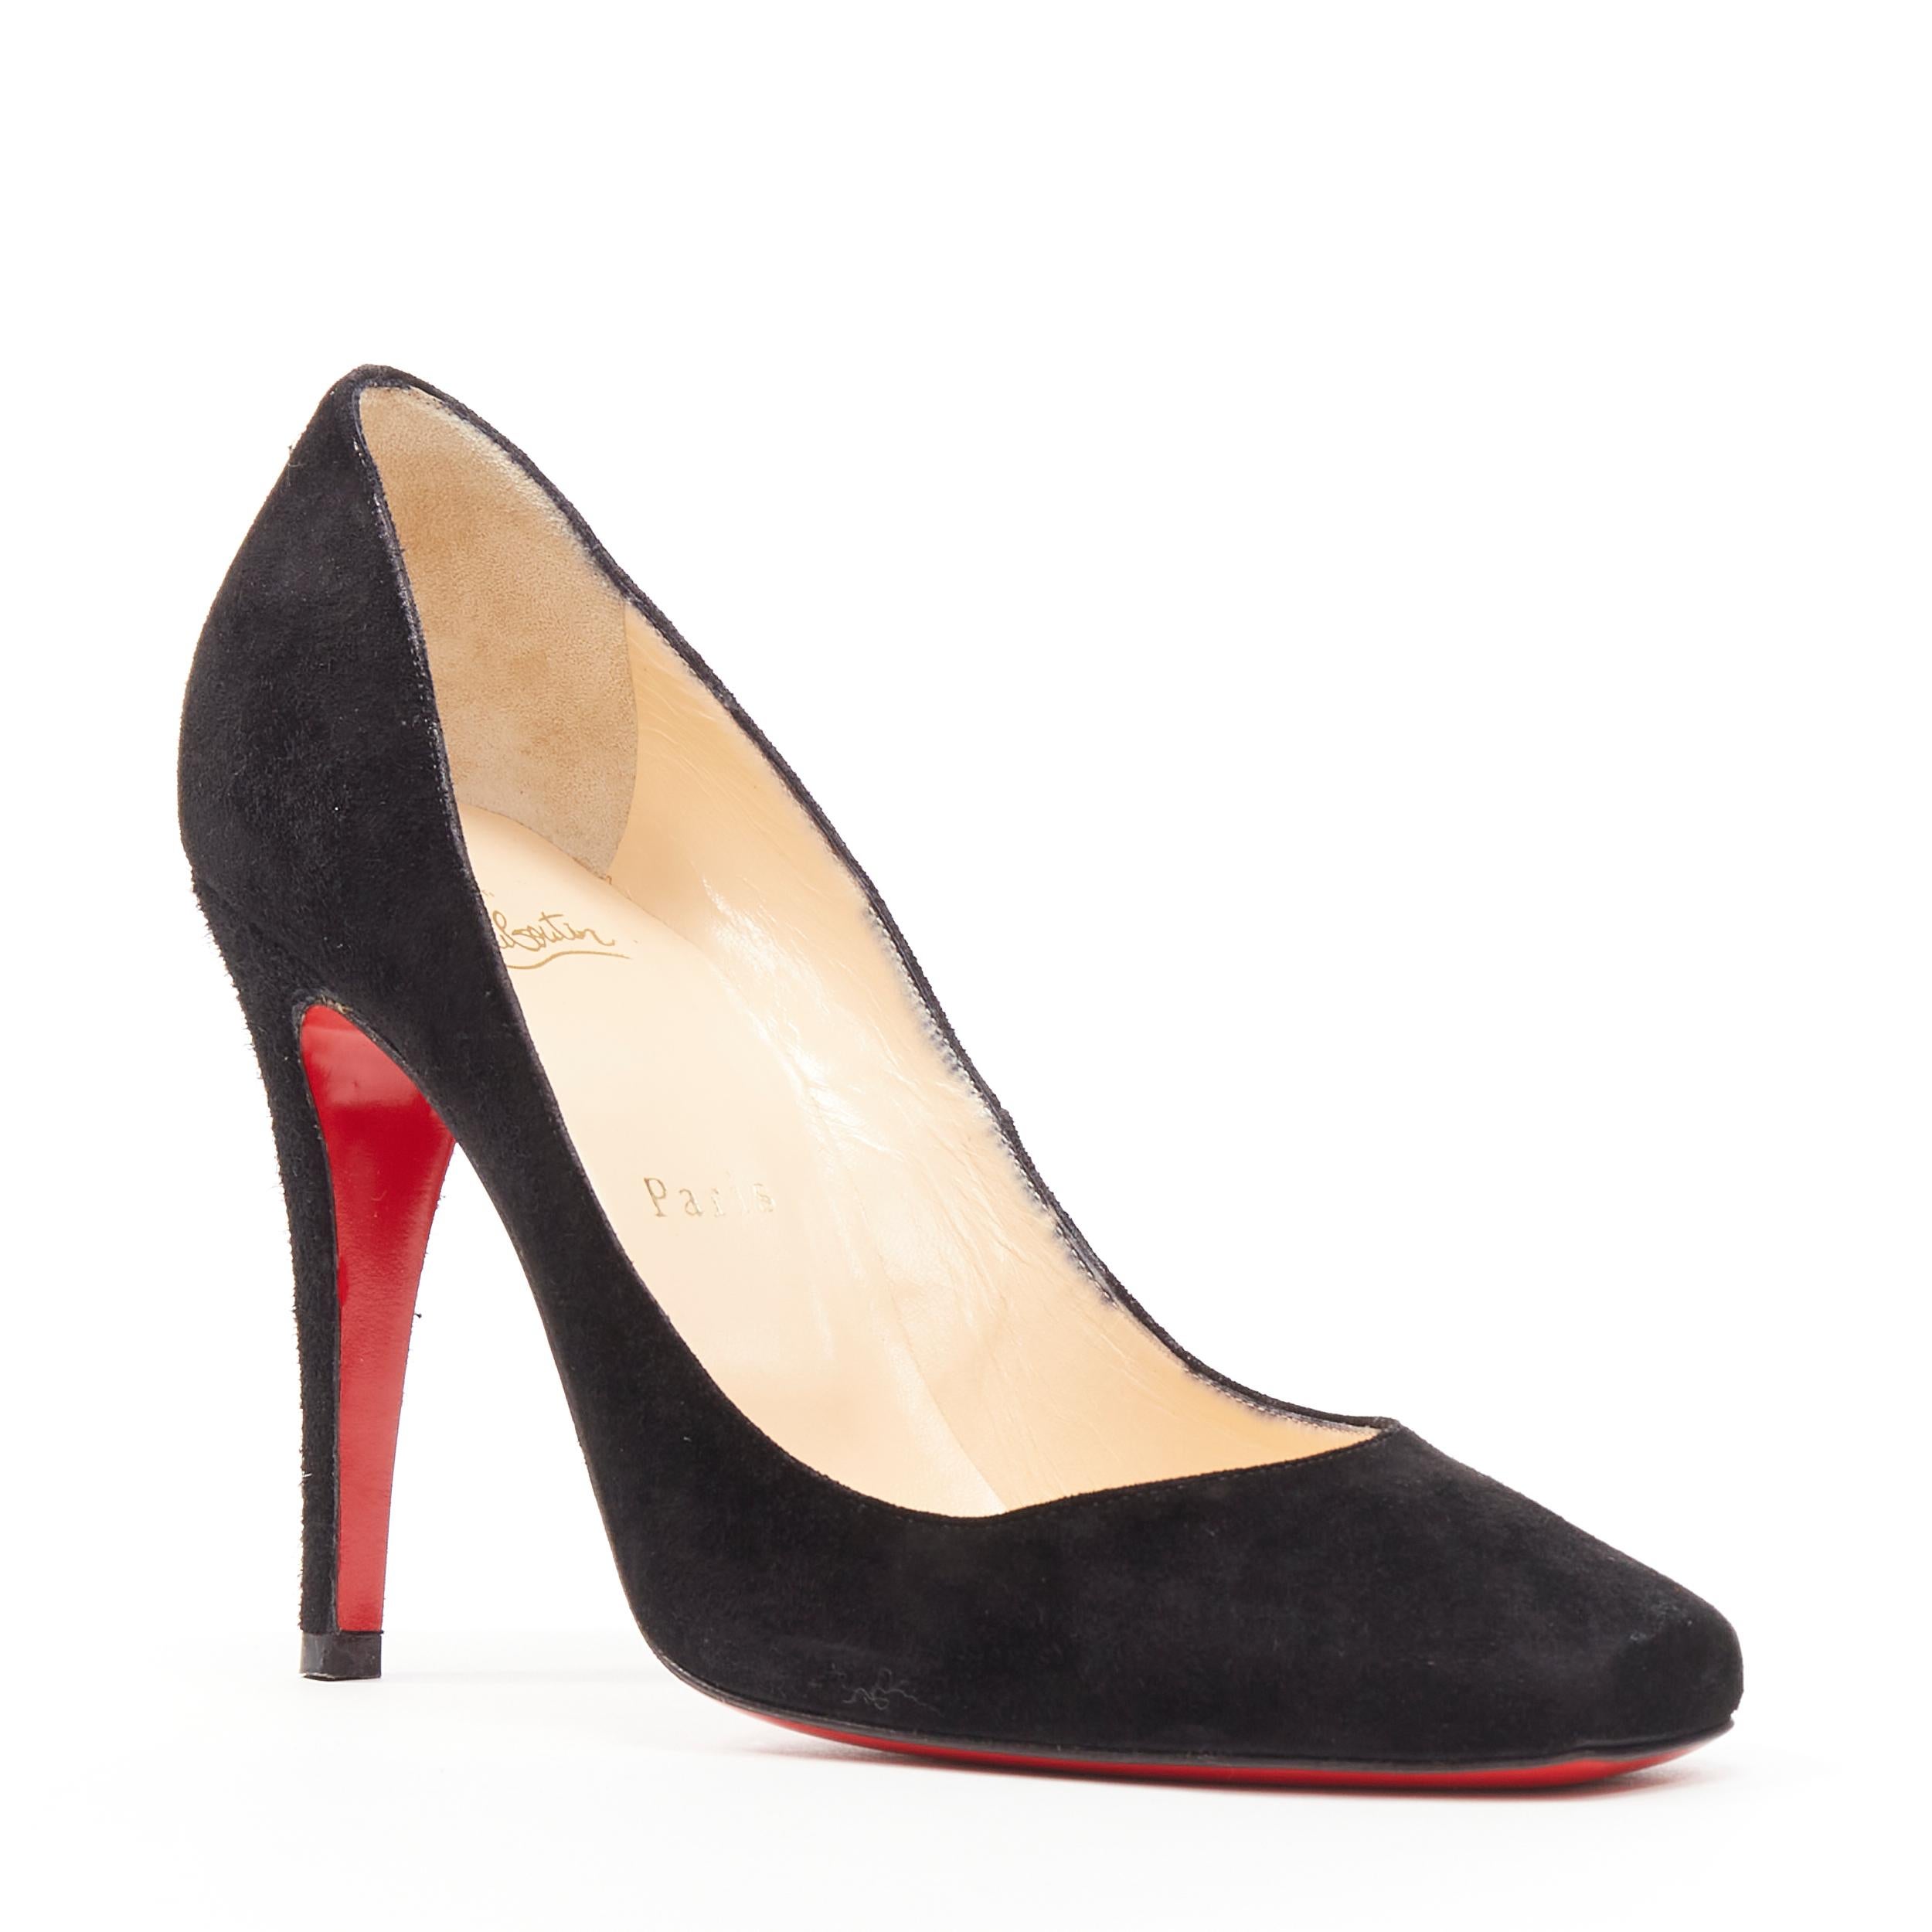 new CHRISTIAN LOUBOUTIN black suede leather square toe high heel pump EU38 
Reference: AEMA/A00014 
Brand: Christian Louboutin 
Designer: Christian Louboutin 
Model: Square toe suede pump 
Material: Suede 
Color: Black 
Pattern: Solid 
Extra Detail: